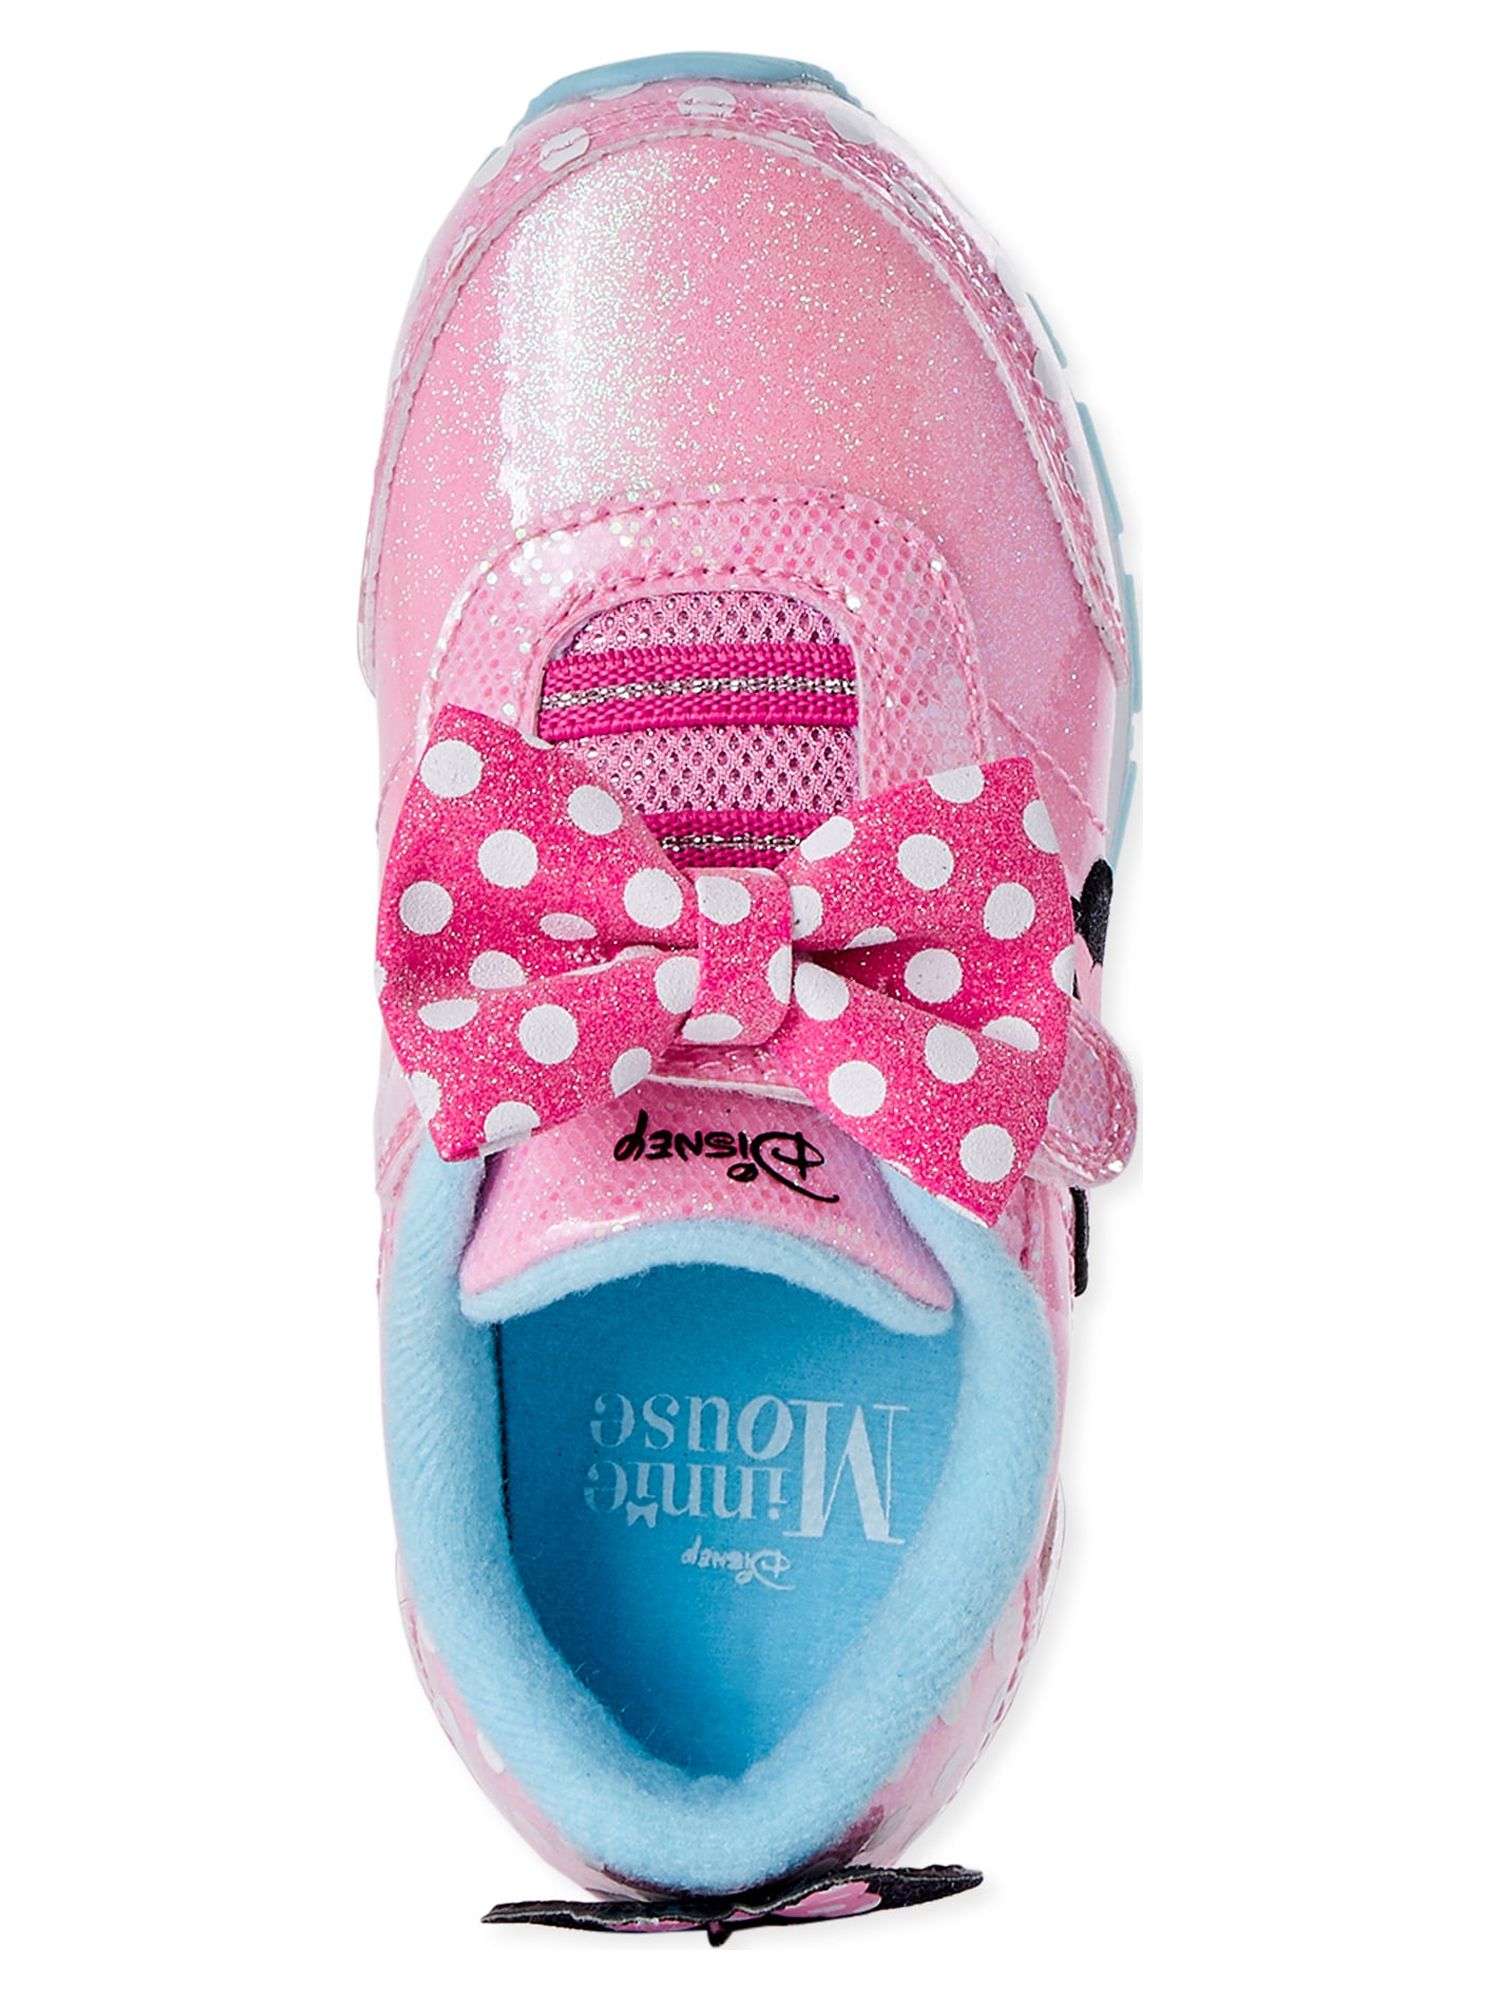 Minnie Mouse Toddler Girls Athletic Sneakers, Sizes 7-12 - Walmart.com